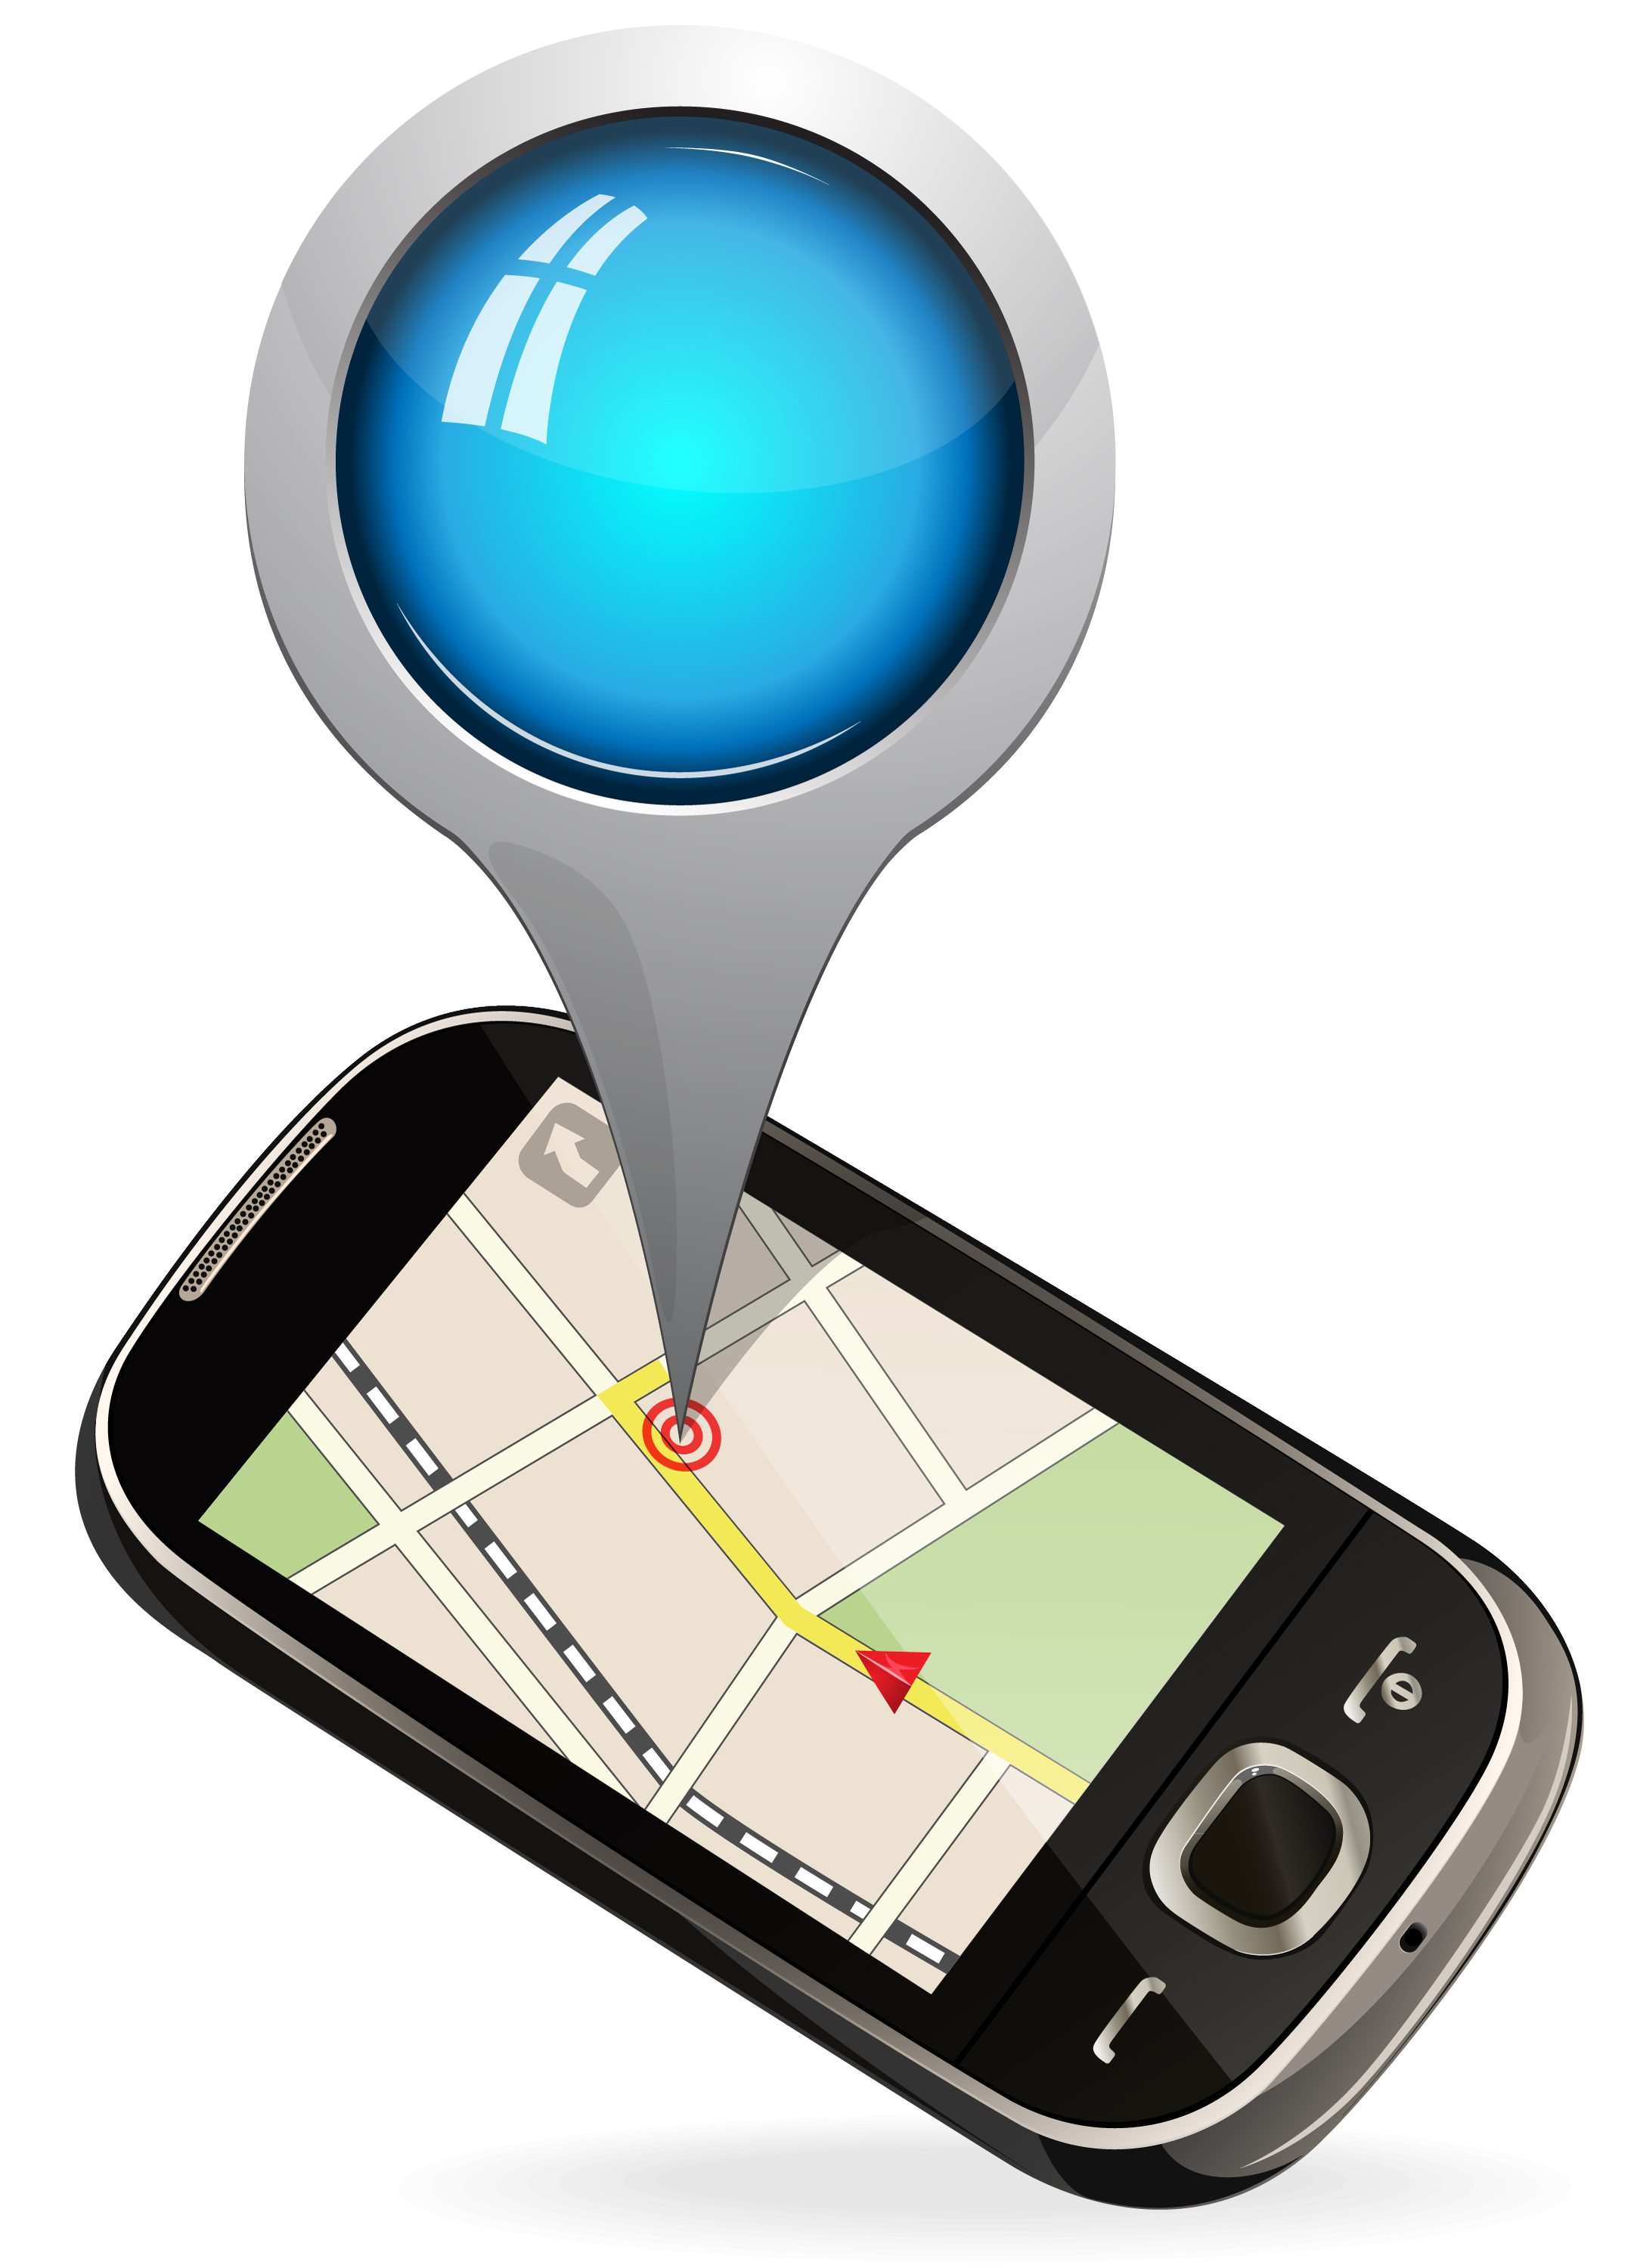 GPS enabled map